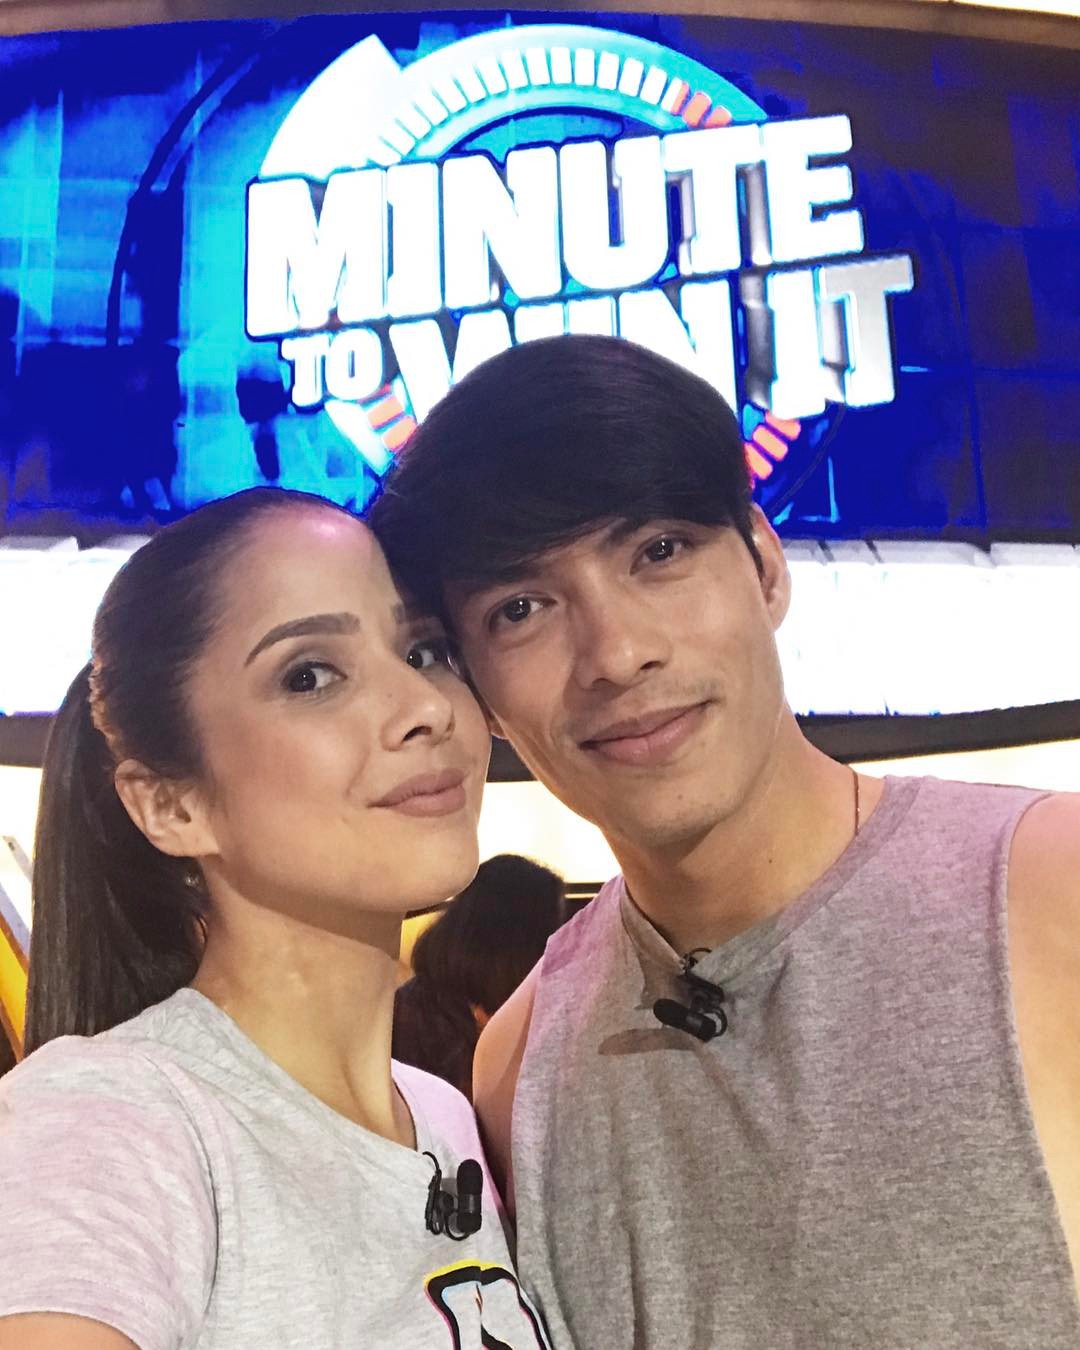 Couple goals! Check out Maxene and Rob's picture-perfect moments in this gallery